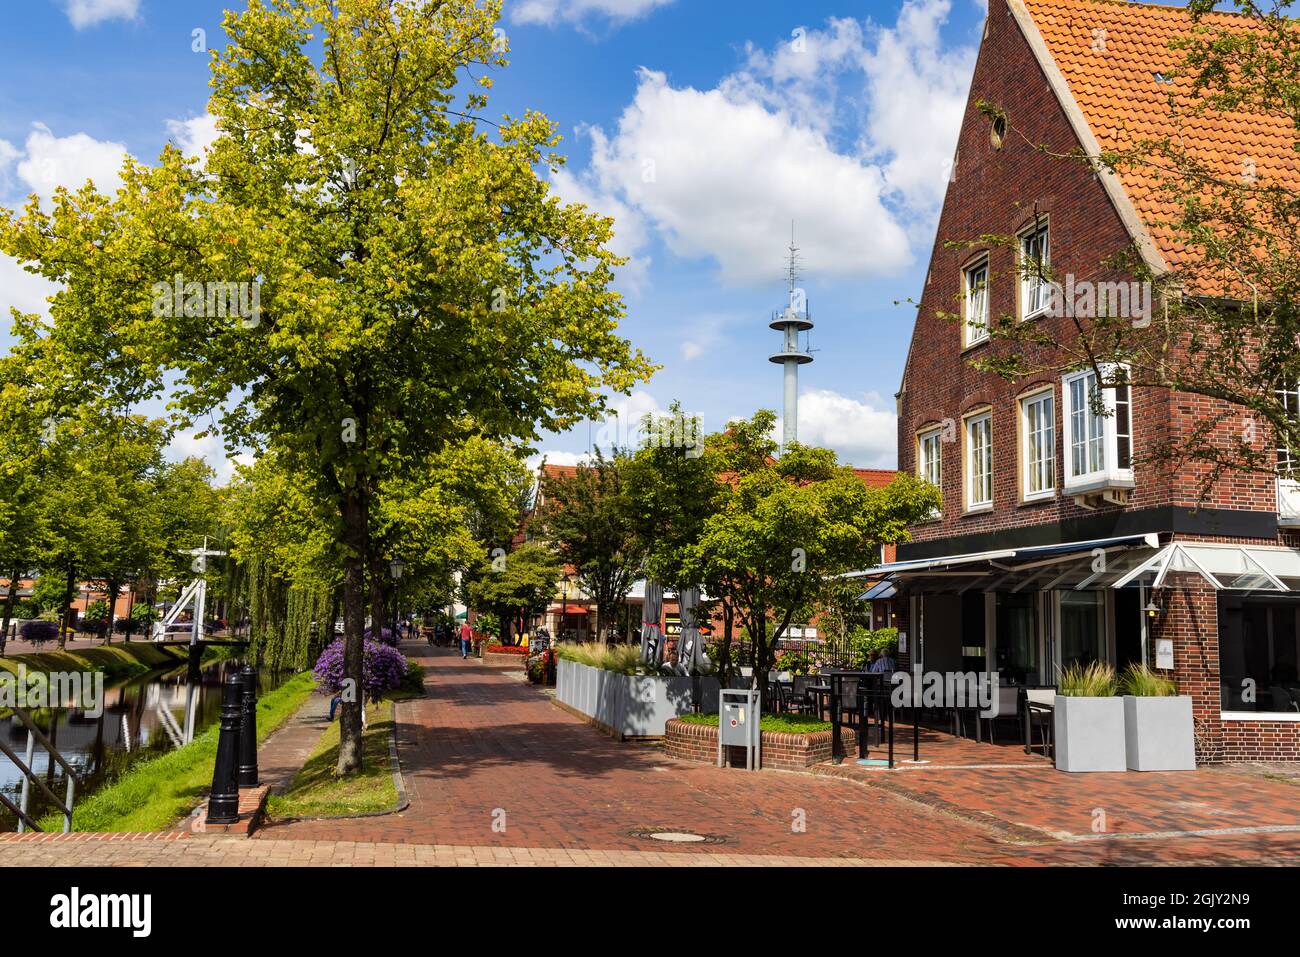 Papenburg, Germany - August 24, 2021: Colorful old village centre of Papenburg along river Ems with canals, little brdiges and ancient ships in Lower Saxony in Germany Stock Photo